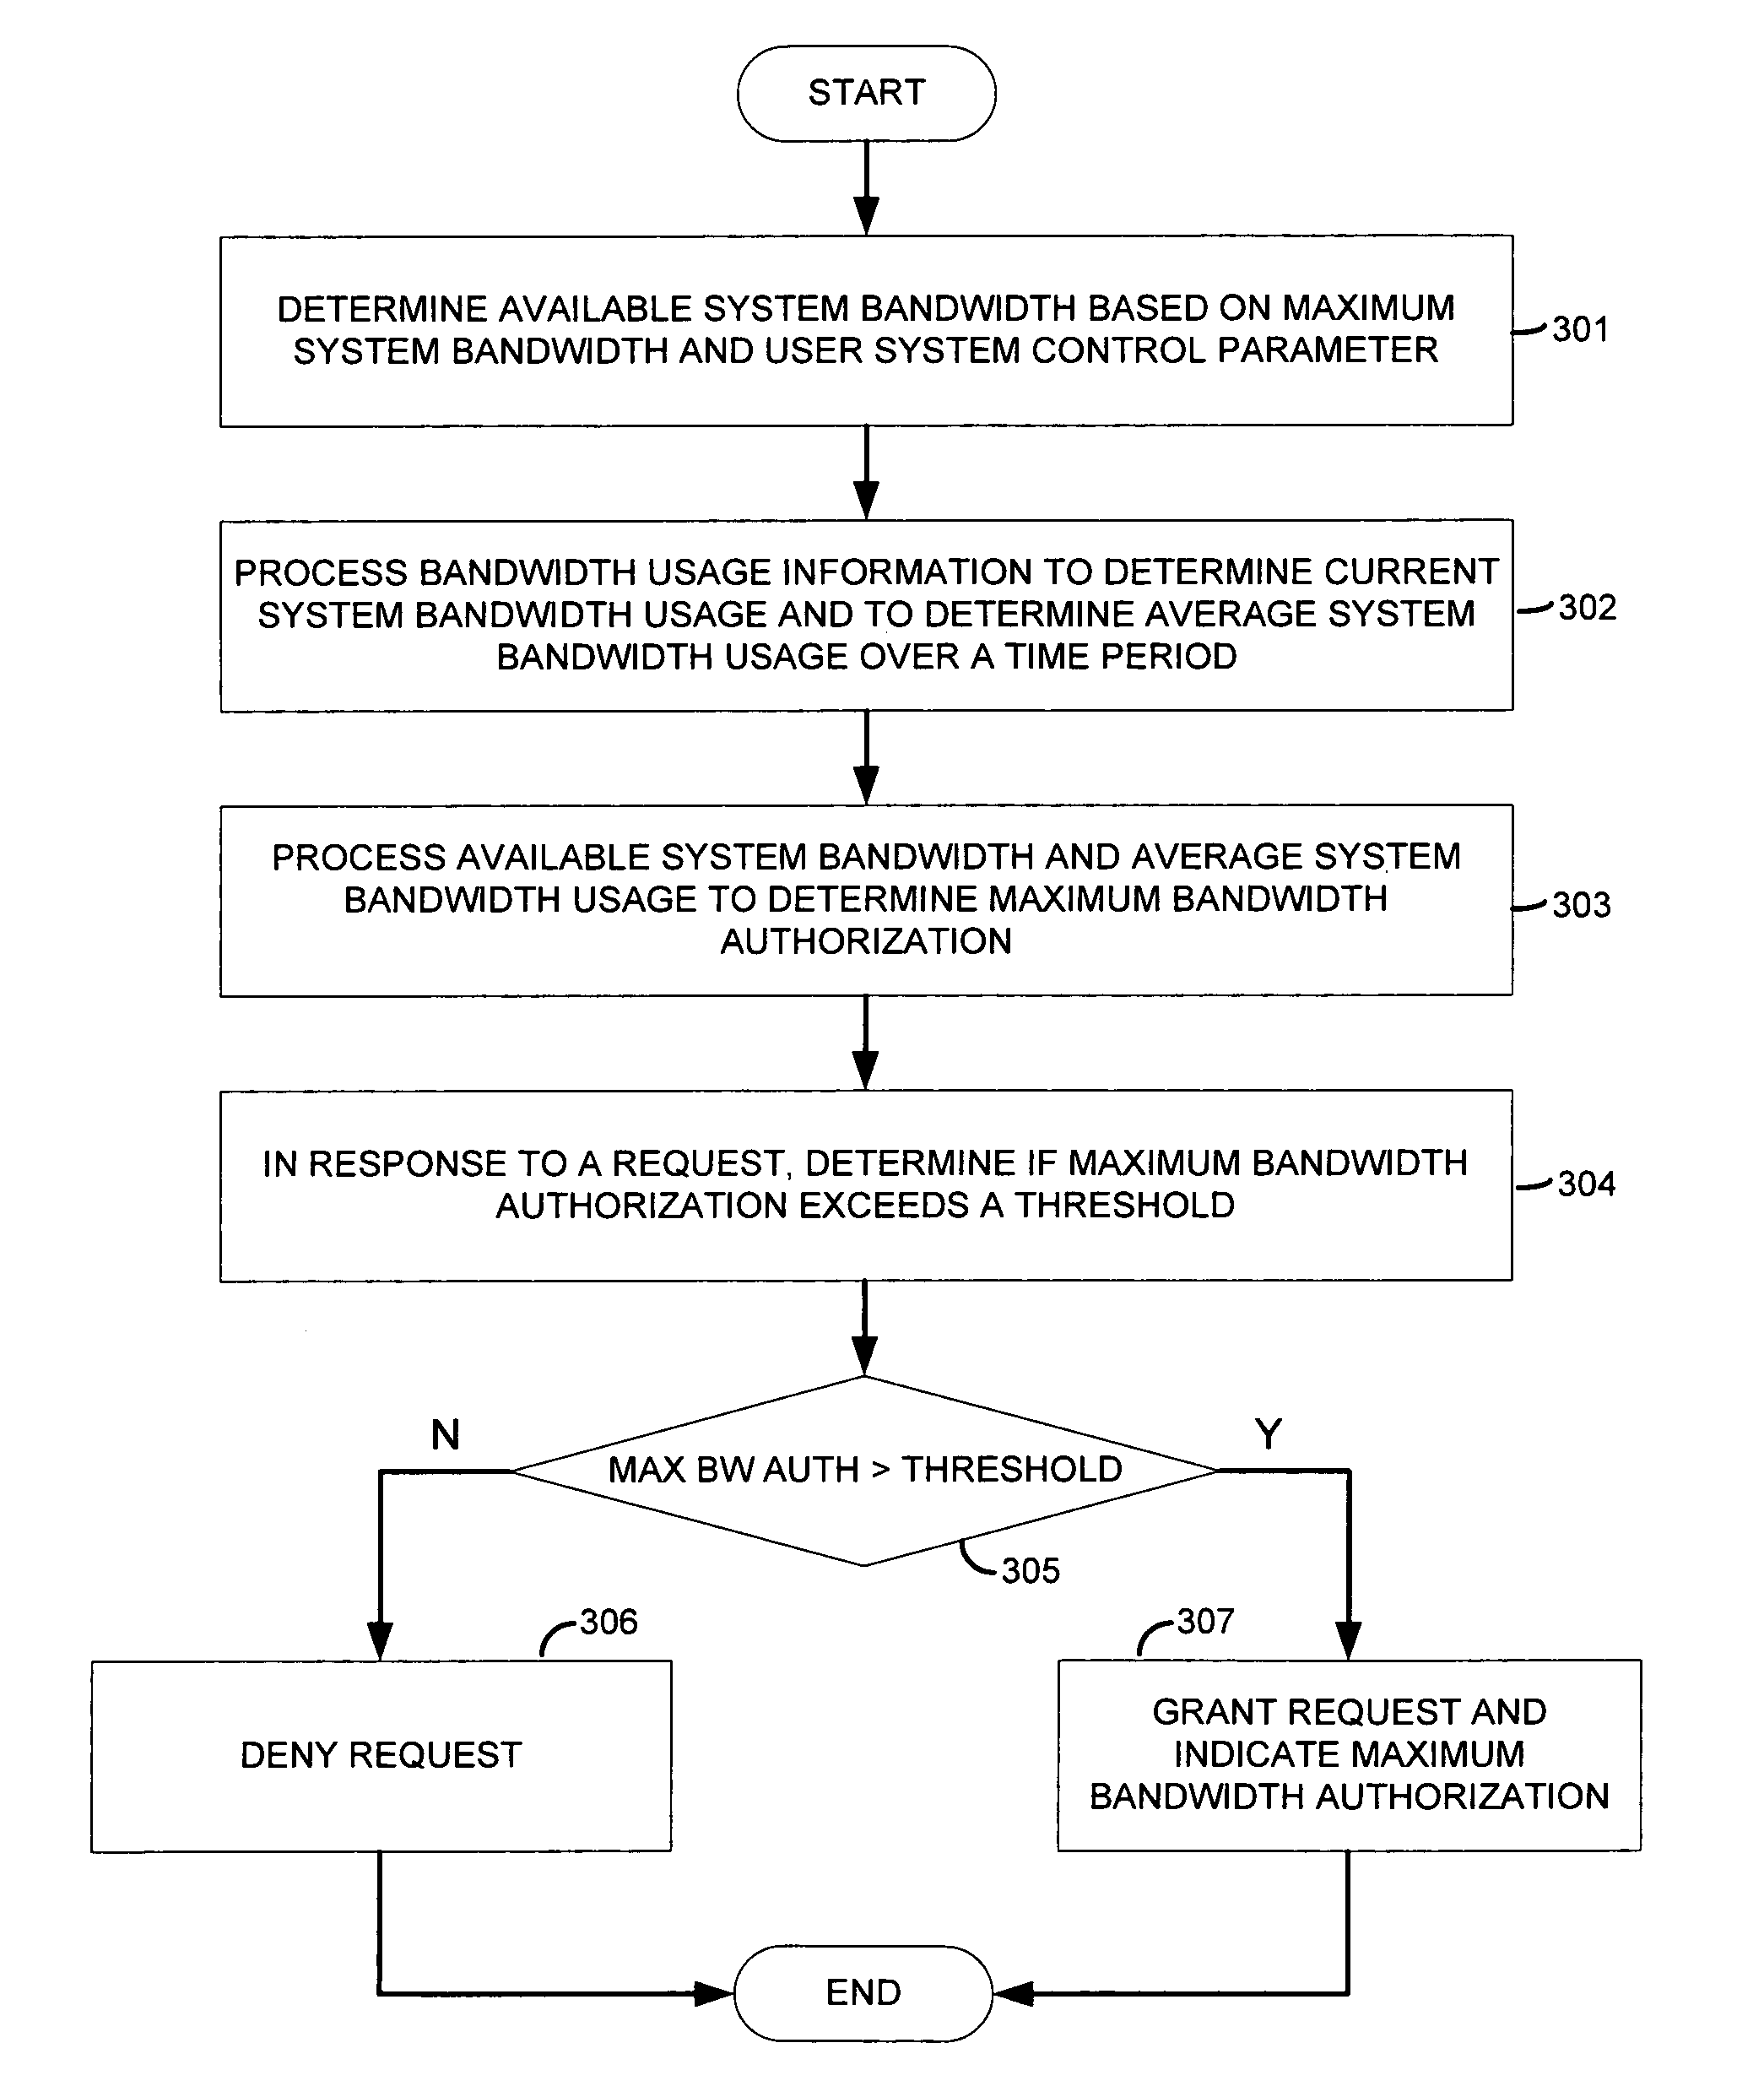 Session admission control for communication systems that use point-to-point protocol over ethernet